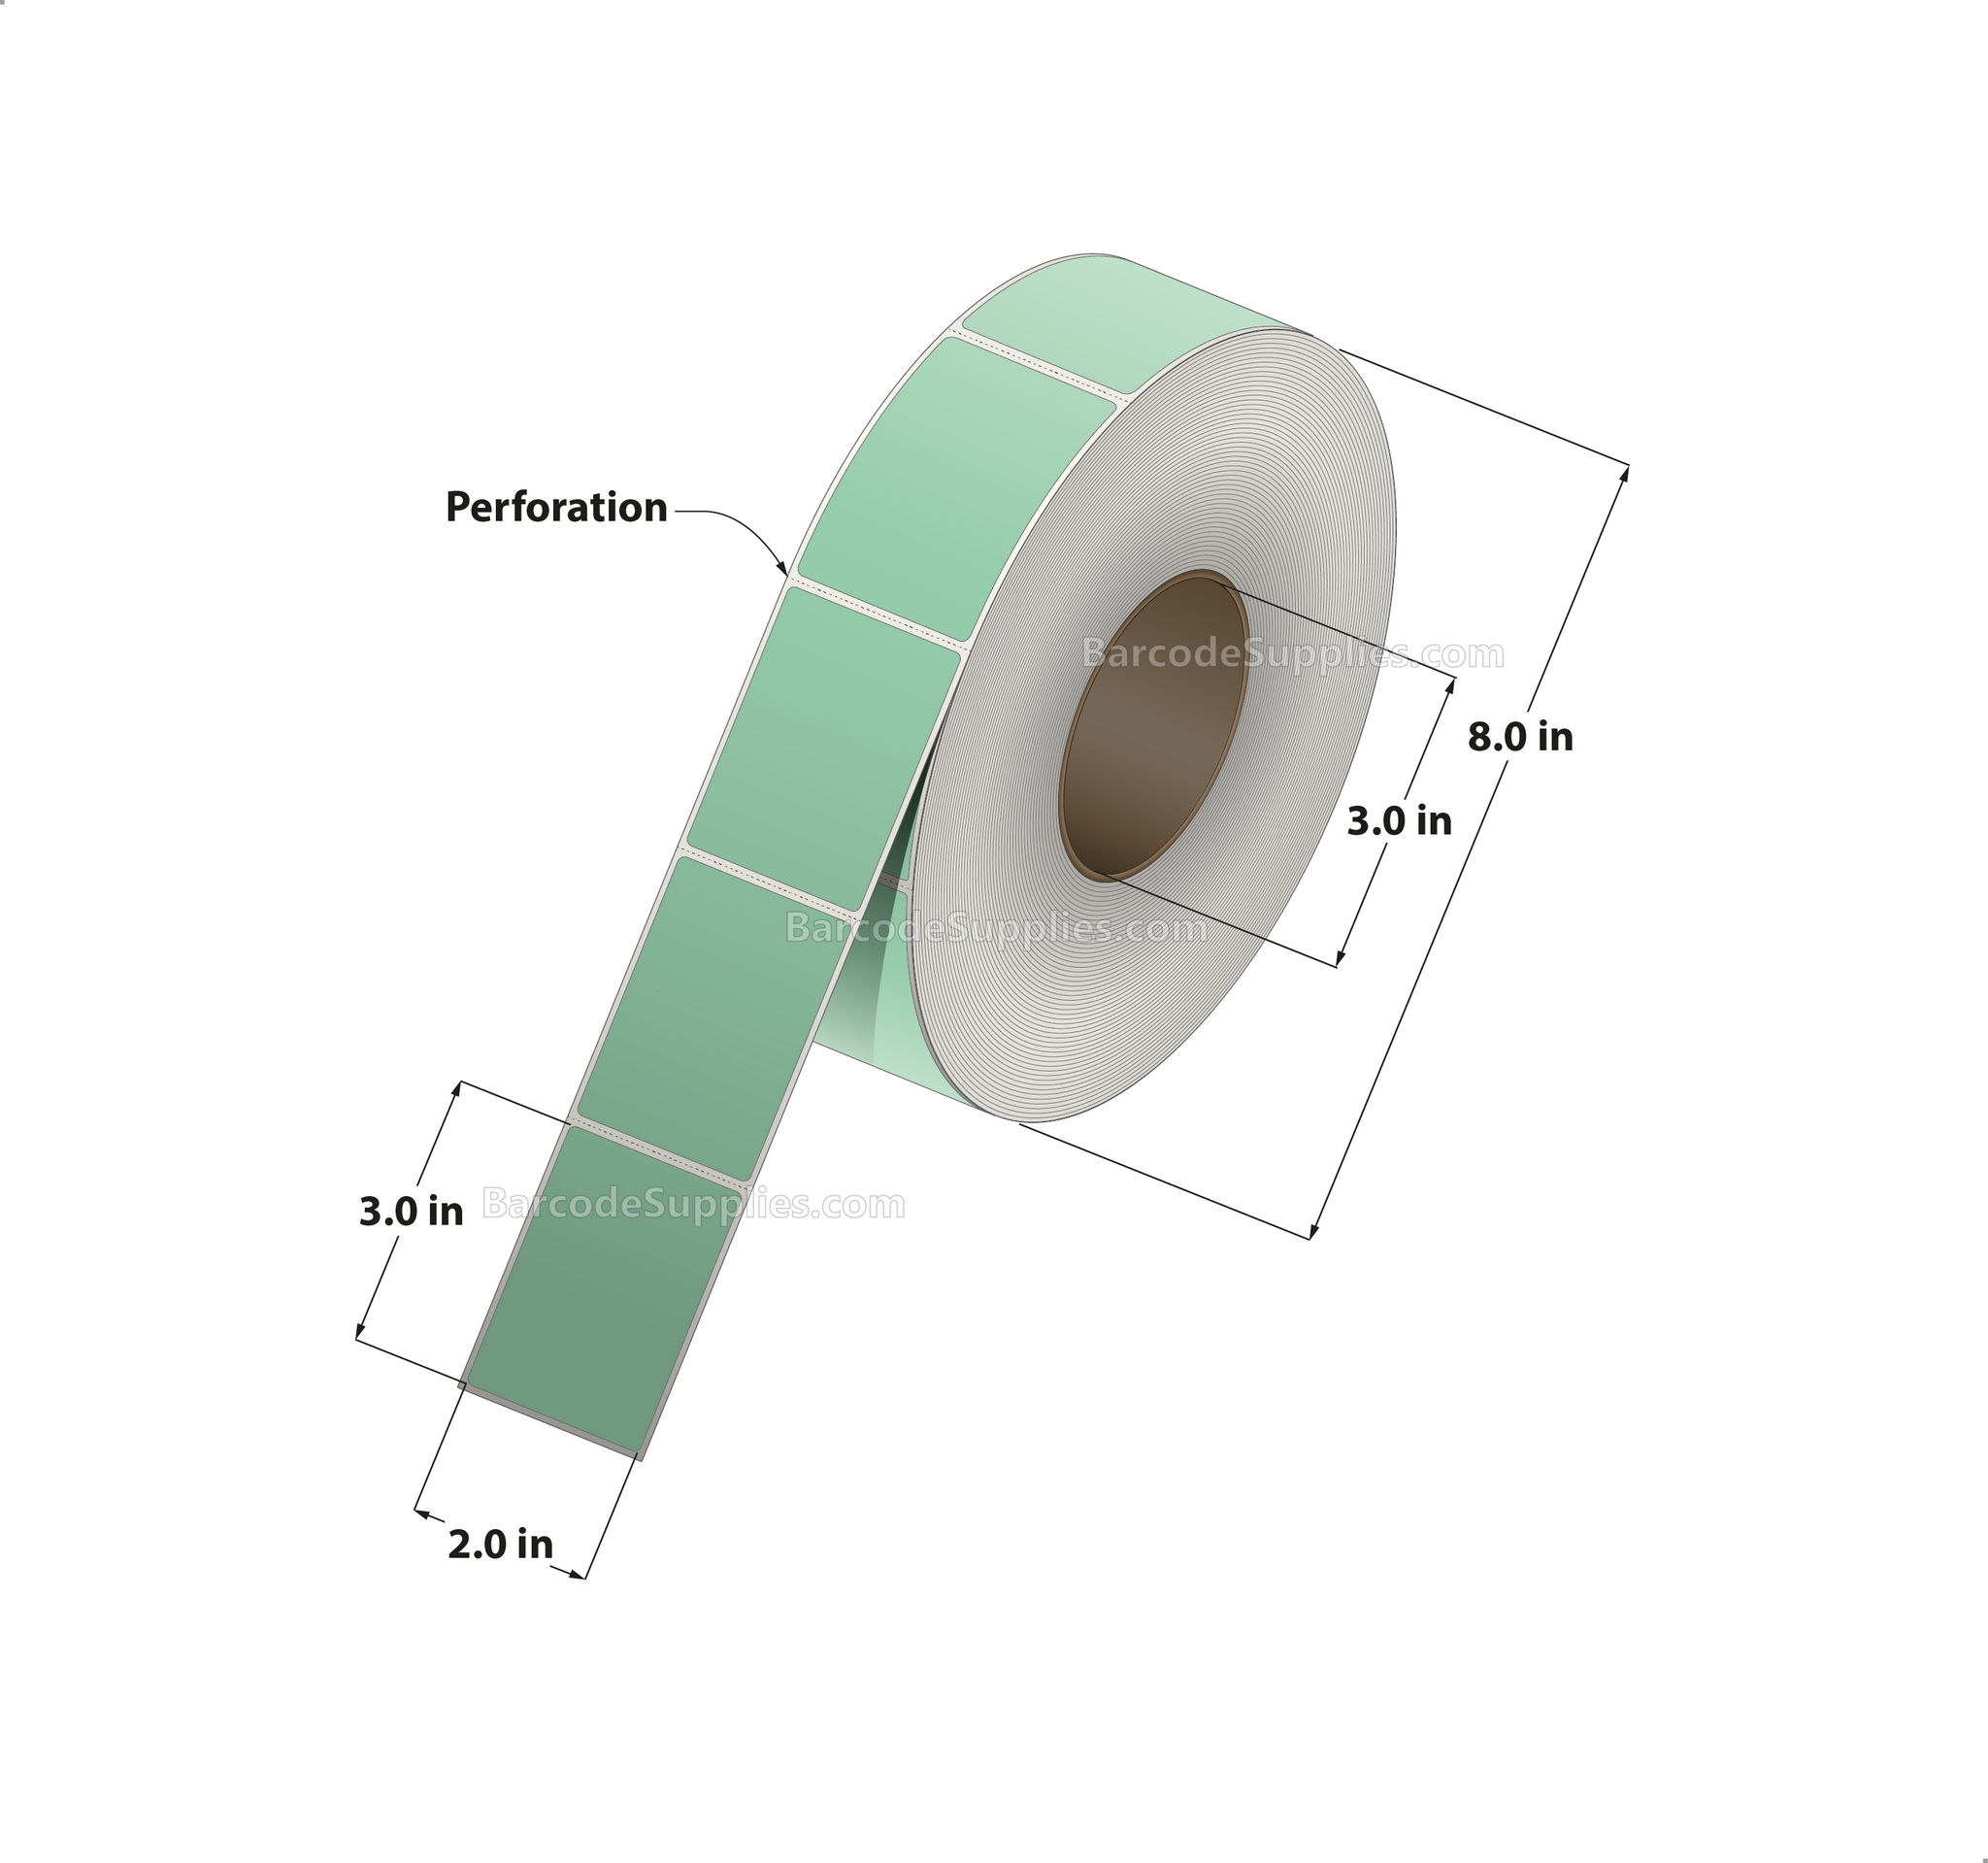 2 x 3 Thermal Transfer 345 Green Labels With Permanent Adhesive - Perforated - 1900 Labels Per Roll - Carton Of 8 Rolls - 15200 Labels Total - MPN: RFC-2-3-1900-GR